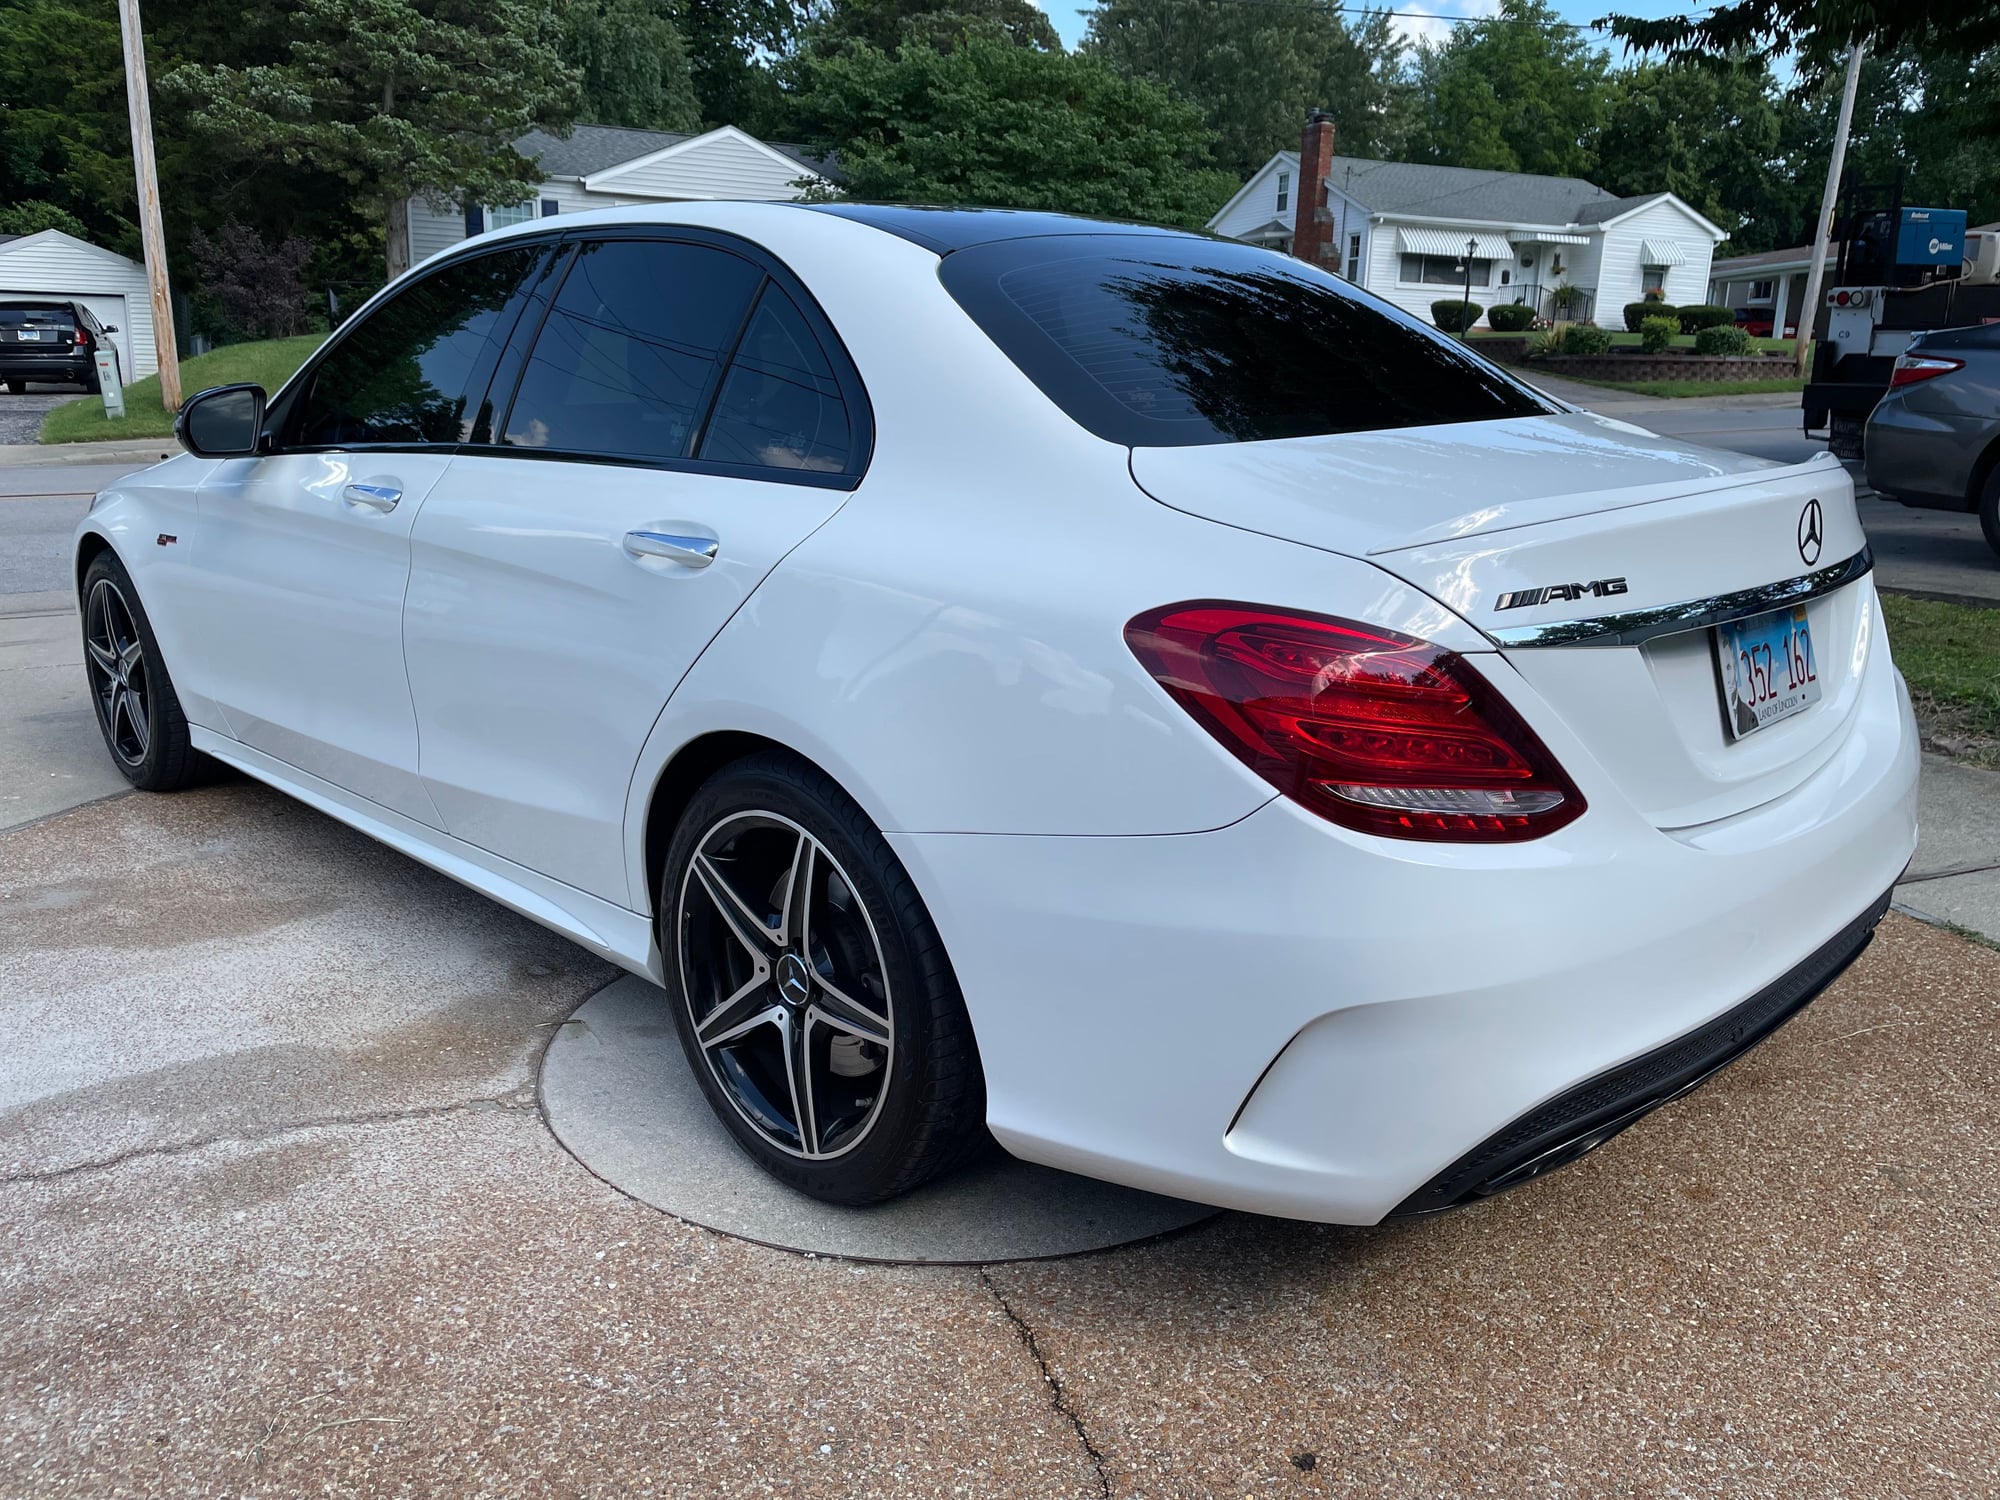 2017 Mercedes-Benz C43 AMG - 2017 C43 AMG - Used - VIN 55SWF6EB2HU215073 - 47,000 Miles - 6 cyl - AWD - Automatic - Sedan - White - Collinsville, IL 62234, United States